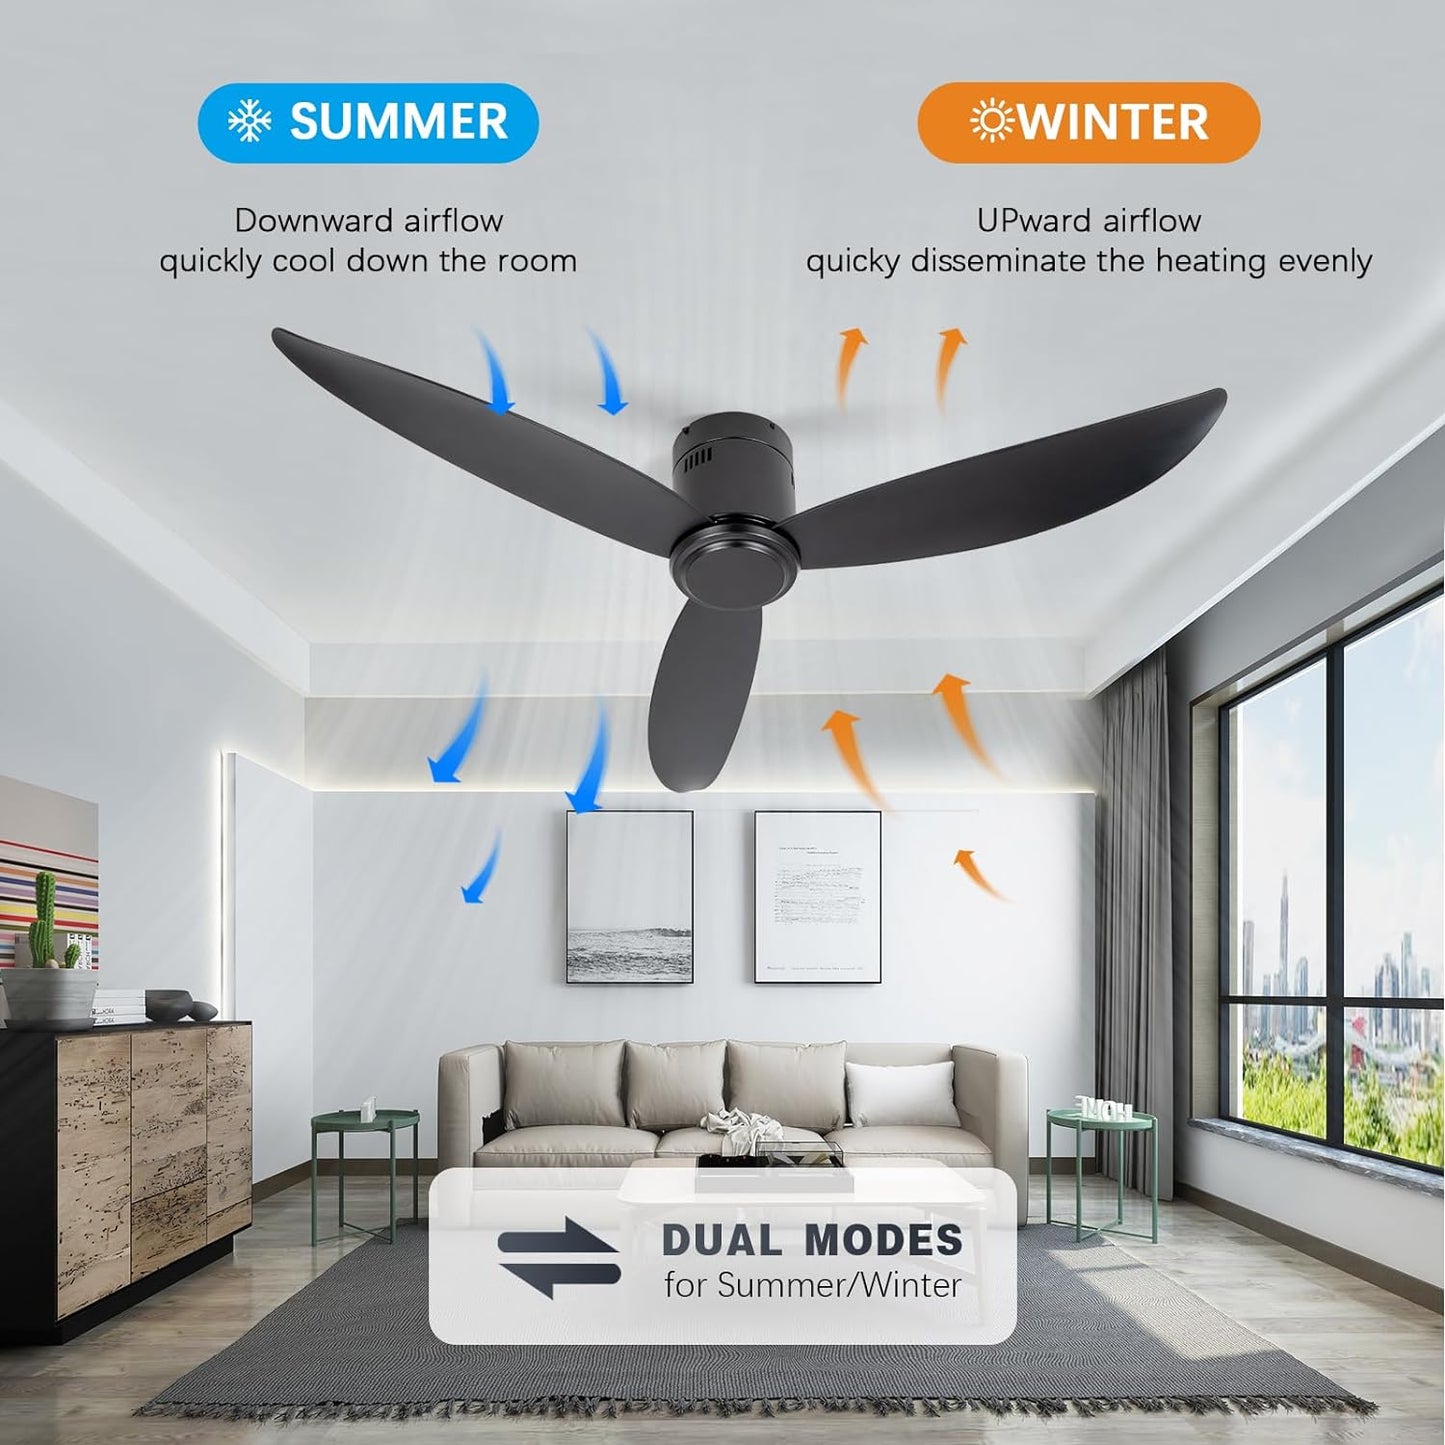 raccroc 52Flush Mount Ceiling Fan No Lights and Remote Control with 3 Black Reversible Blades Ceiling fan,6 Speed DC Motor Ceiling Fan (M3-Black 52in)